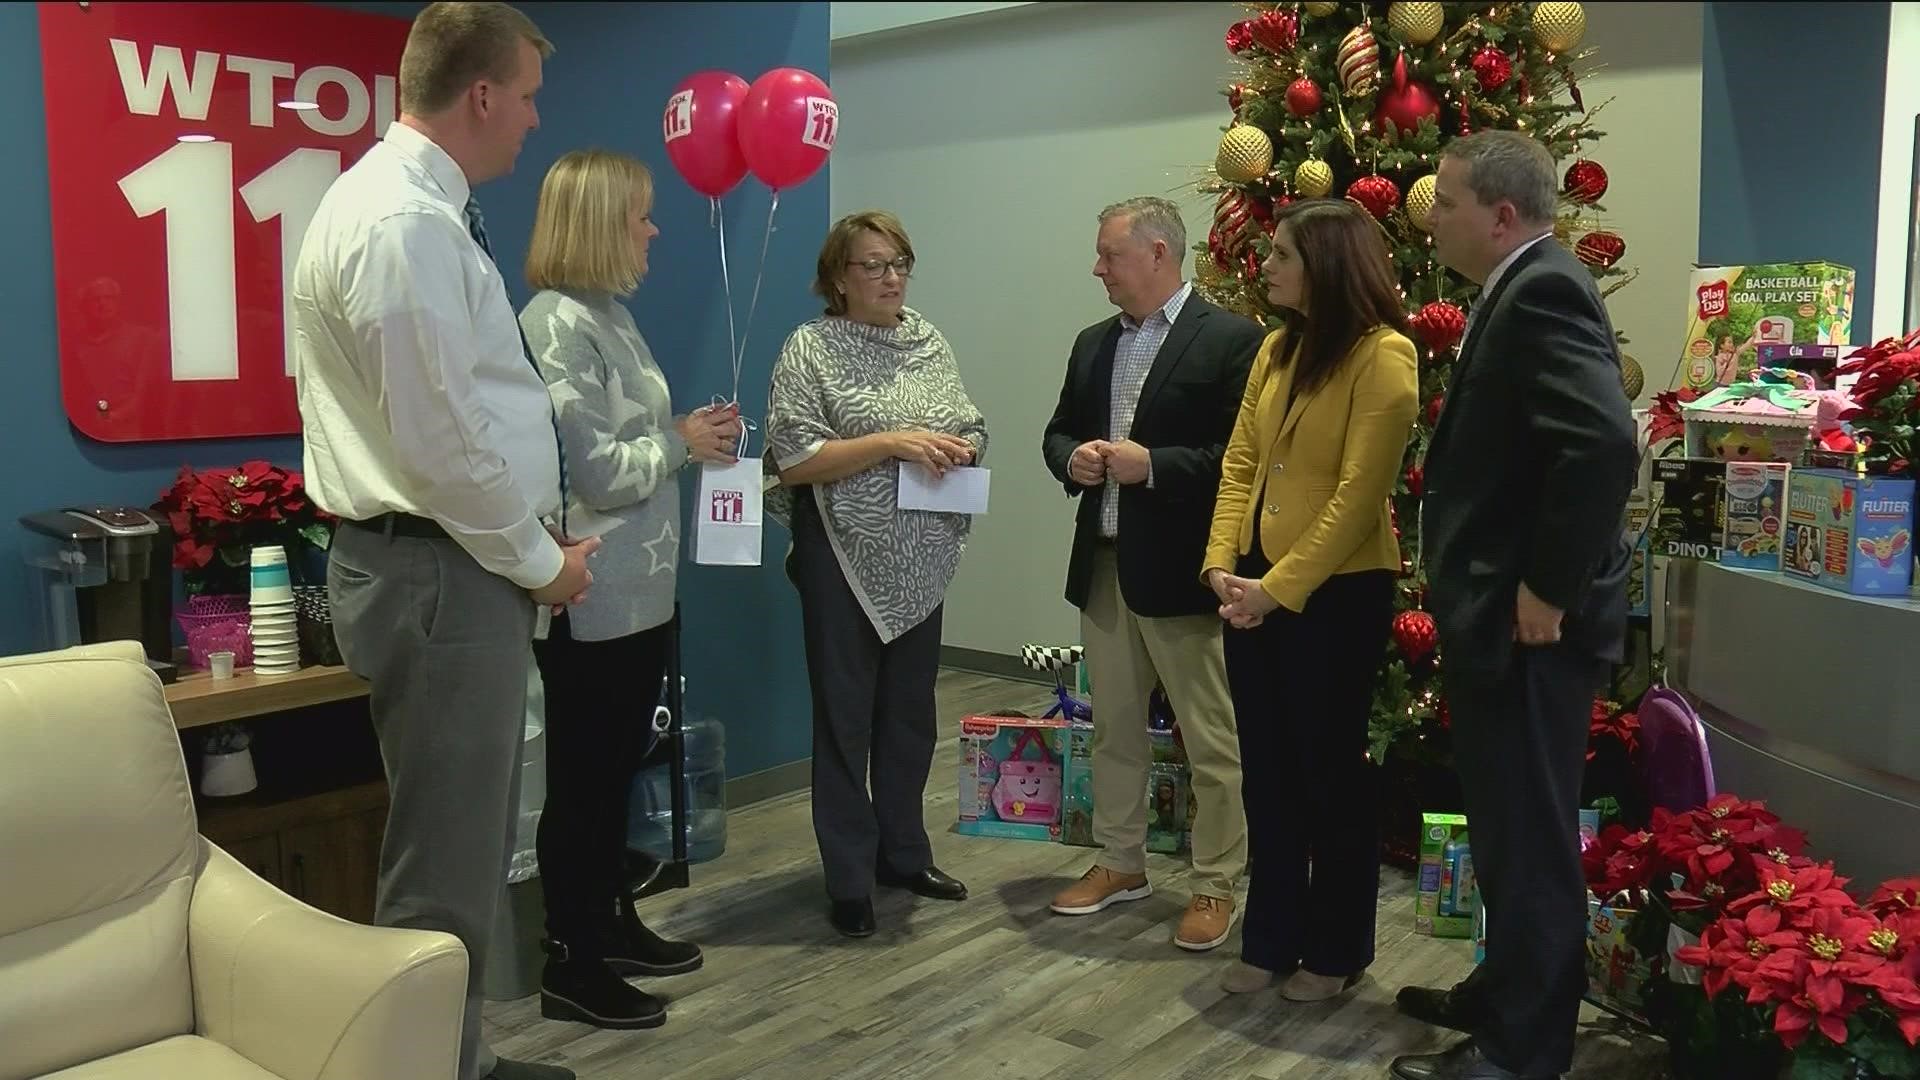 Northwest Ohio non-profits received grants from the TEGNA Foundation.